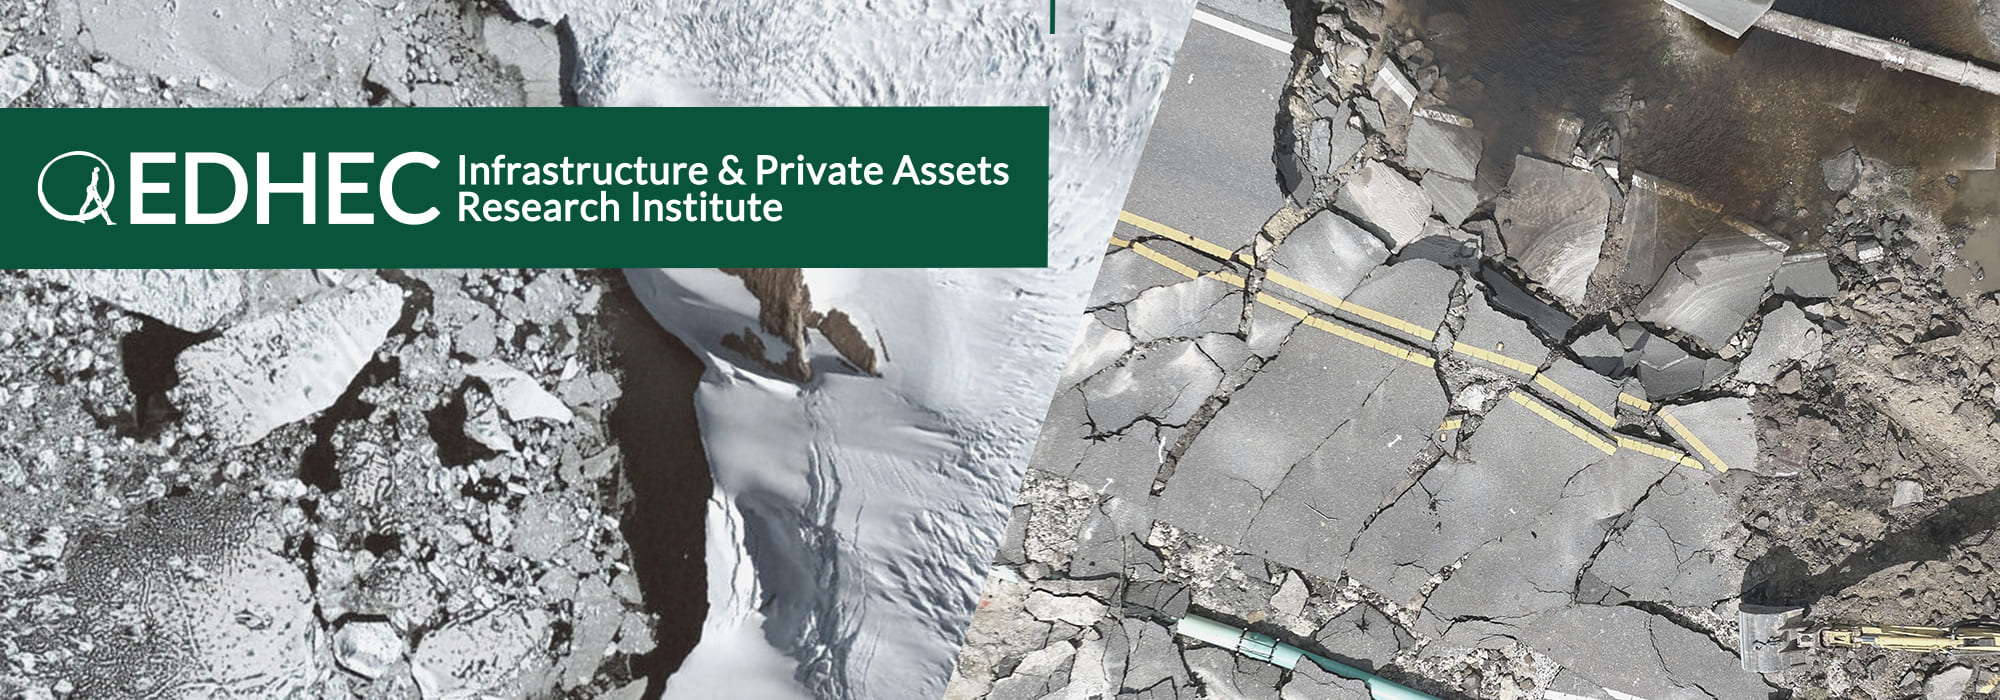 EDHEC Infrastructure & Private Assets Research Institute